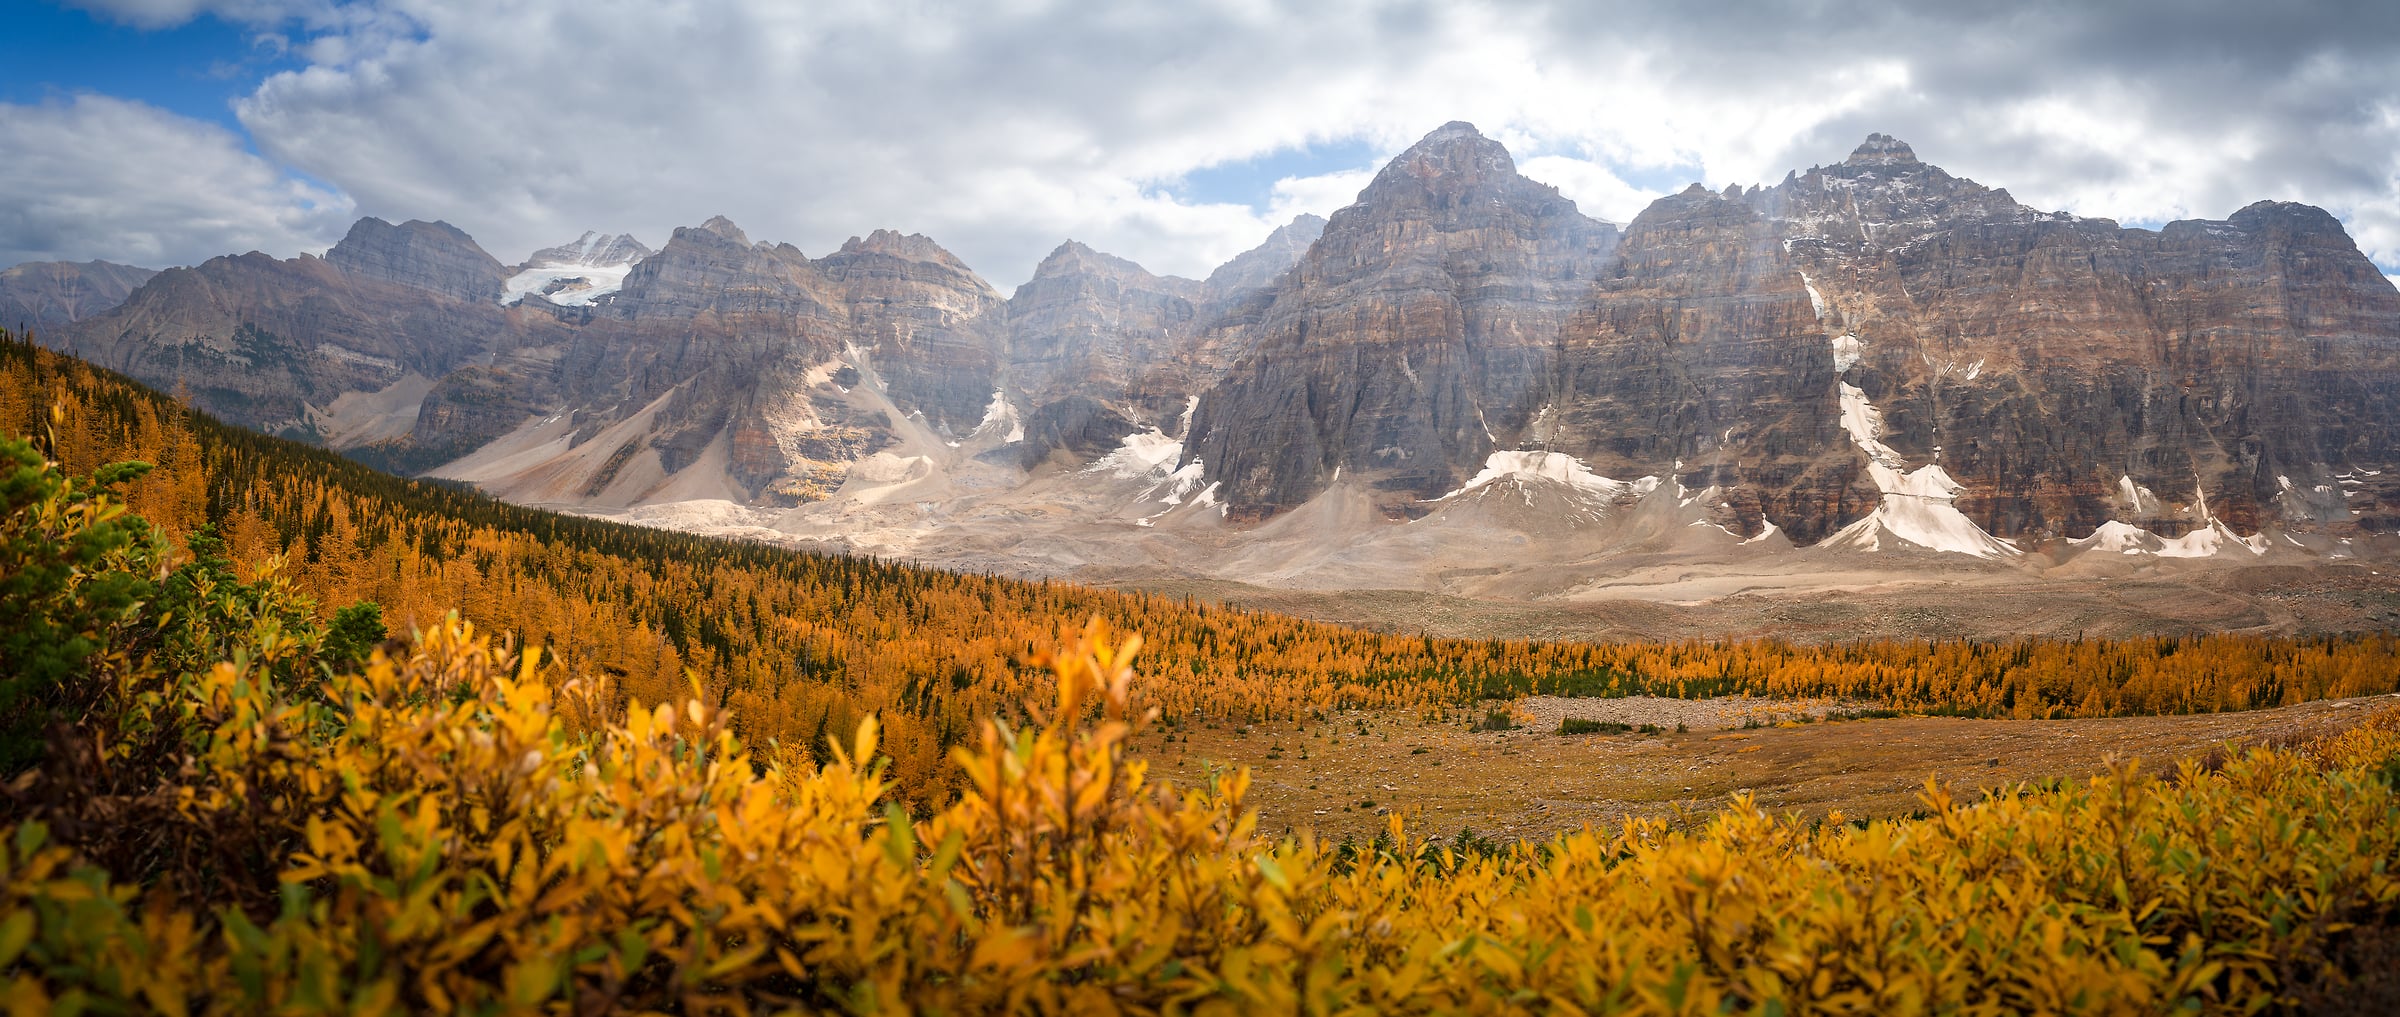 172 megapixels! A very high resolution, large-format VAST photo print of a mountain range in autumn with golden trees and foliage; landscape photograph created by Jeff Lewis in Banff National Park, Canada.